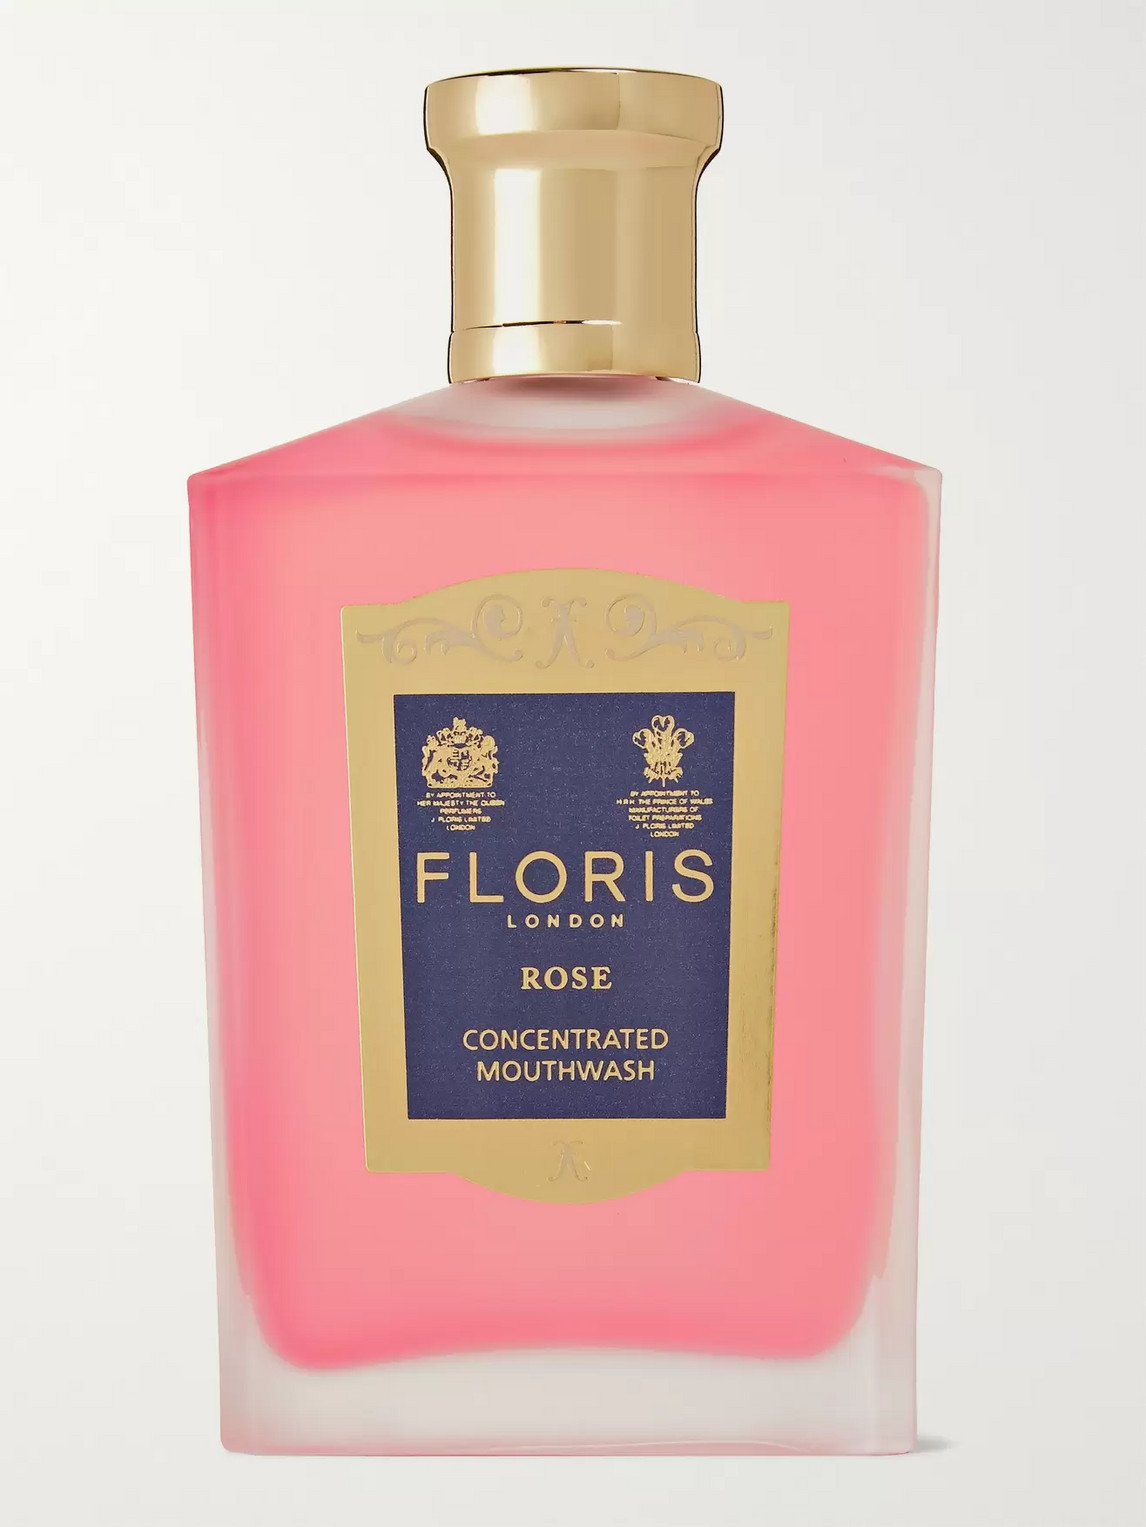 Floris London Rose Concentrated Mouthwash, 100ml In Colorless